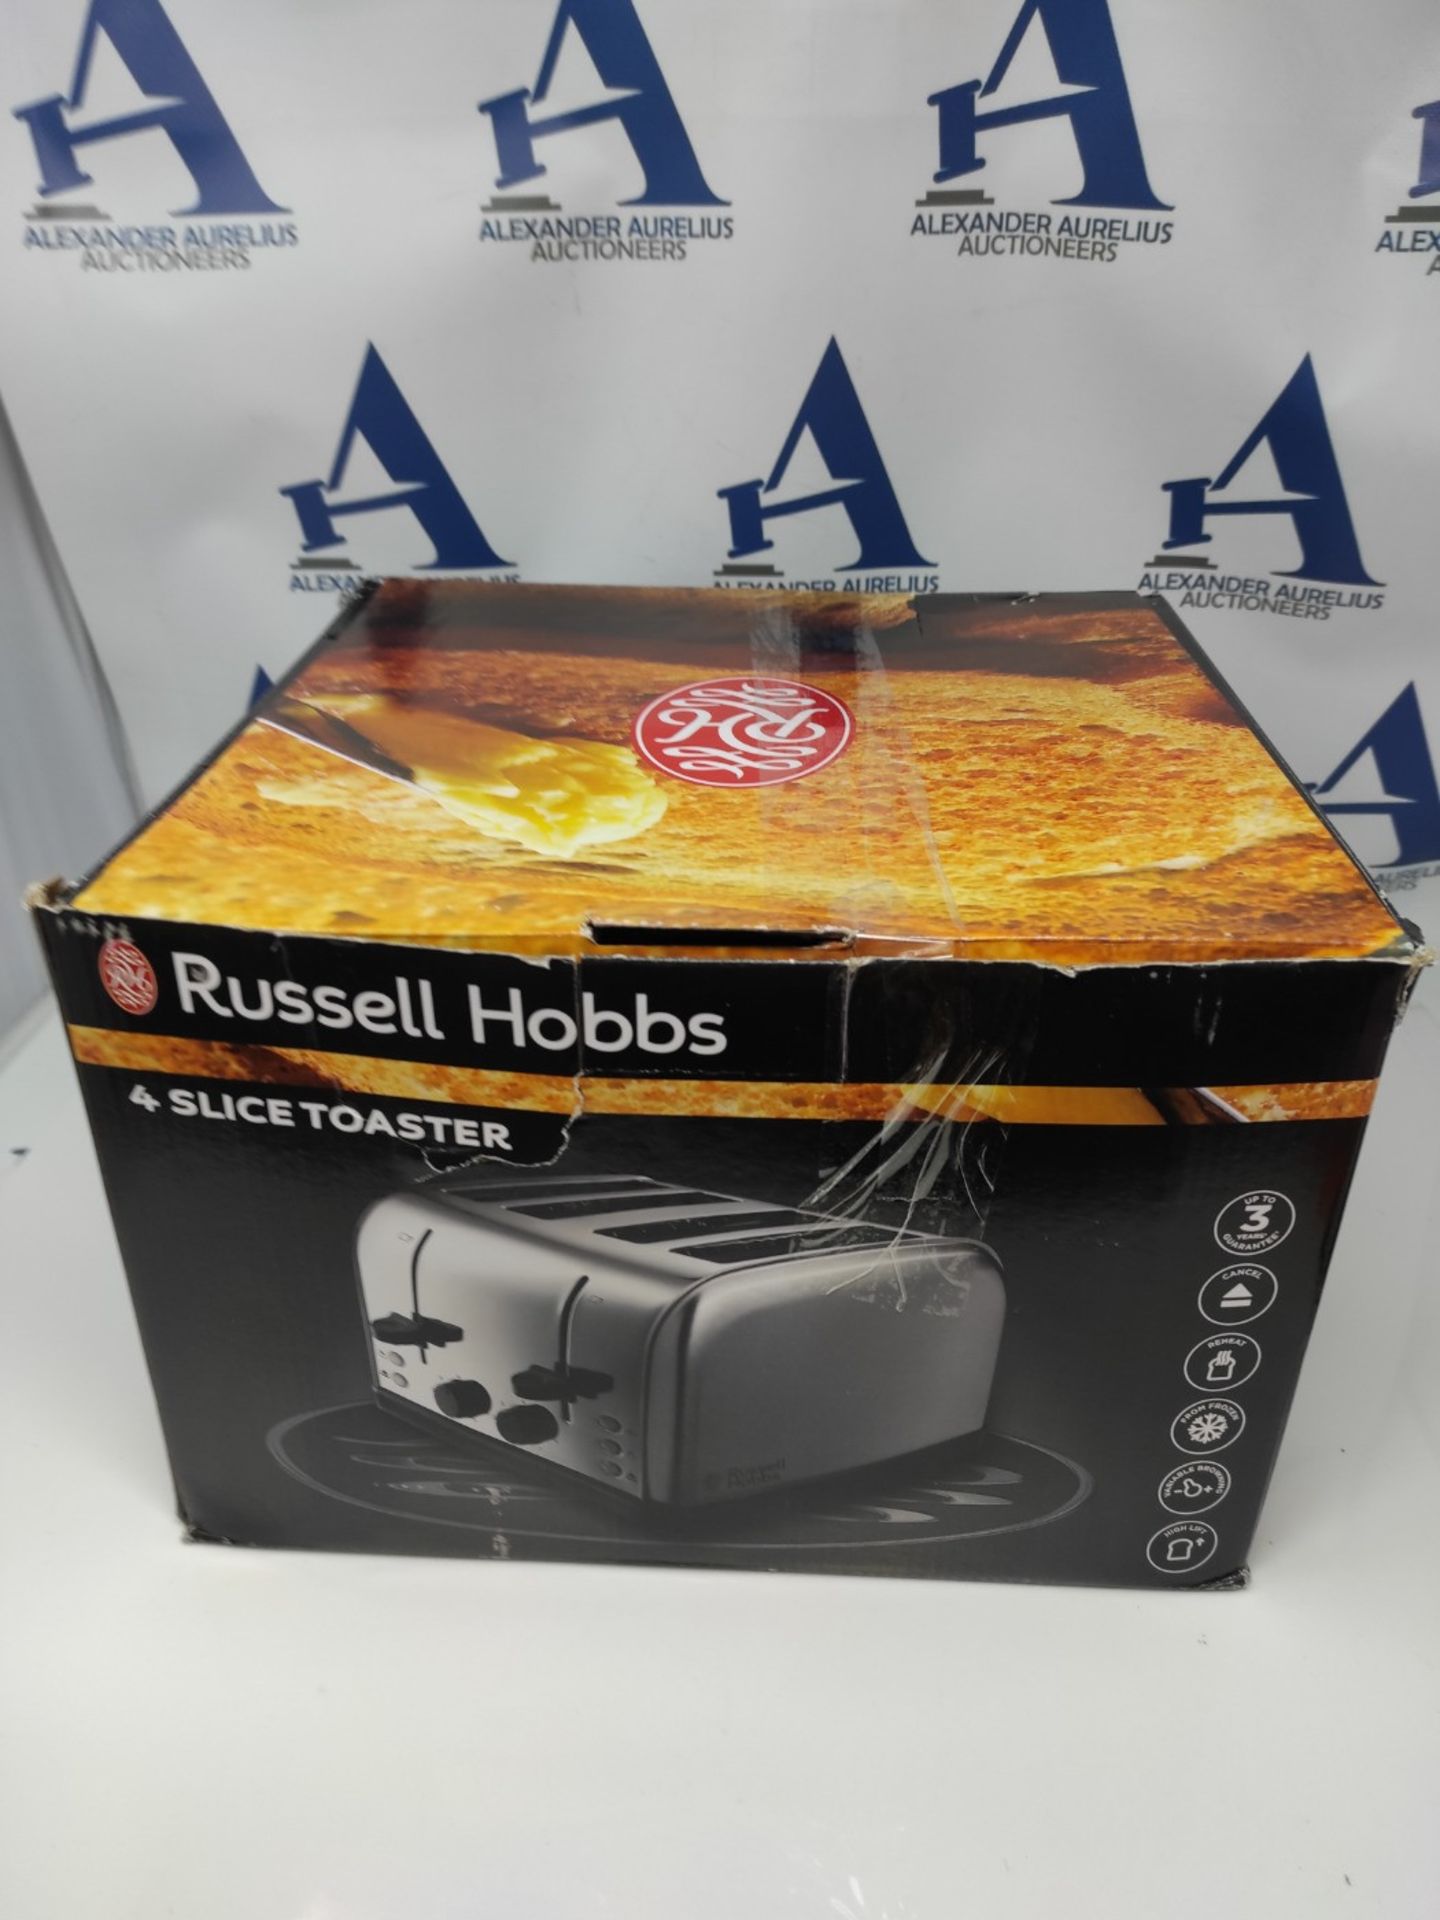 Russell Hobbs 18790 Futura 4-Slice Toaster, 1500 W, Stainless Steel Silver, Four Slice - Image 2 of 3